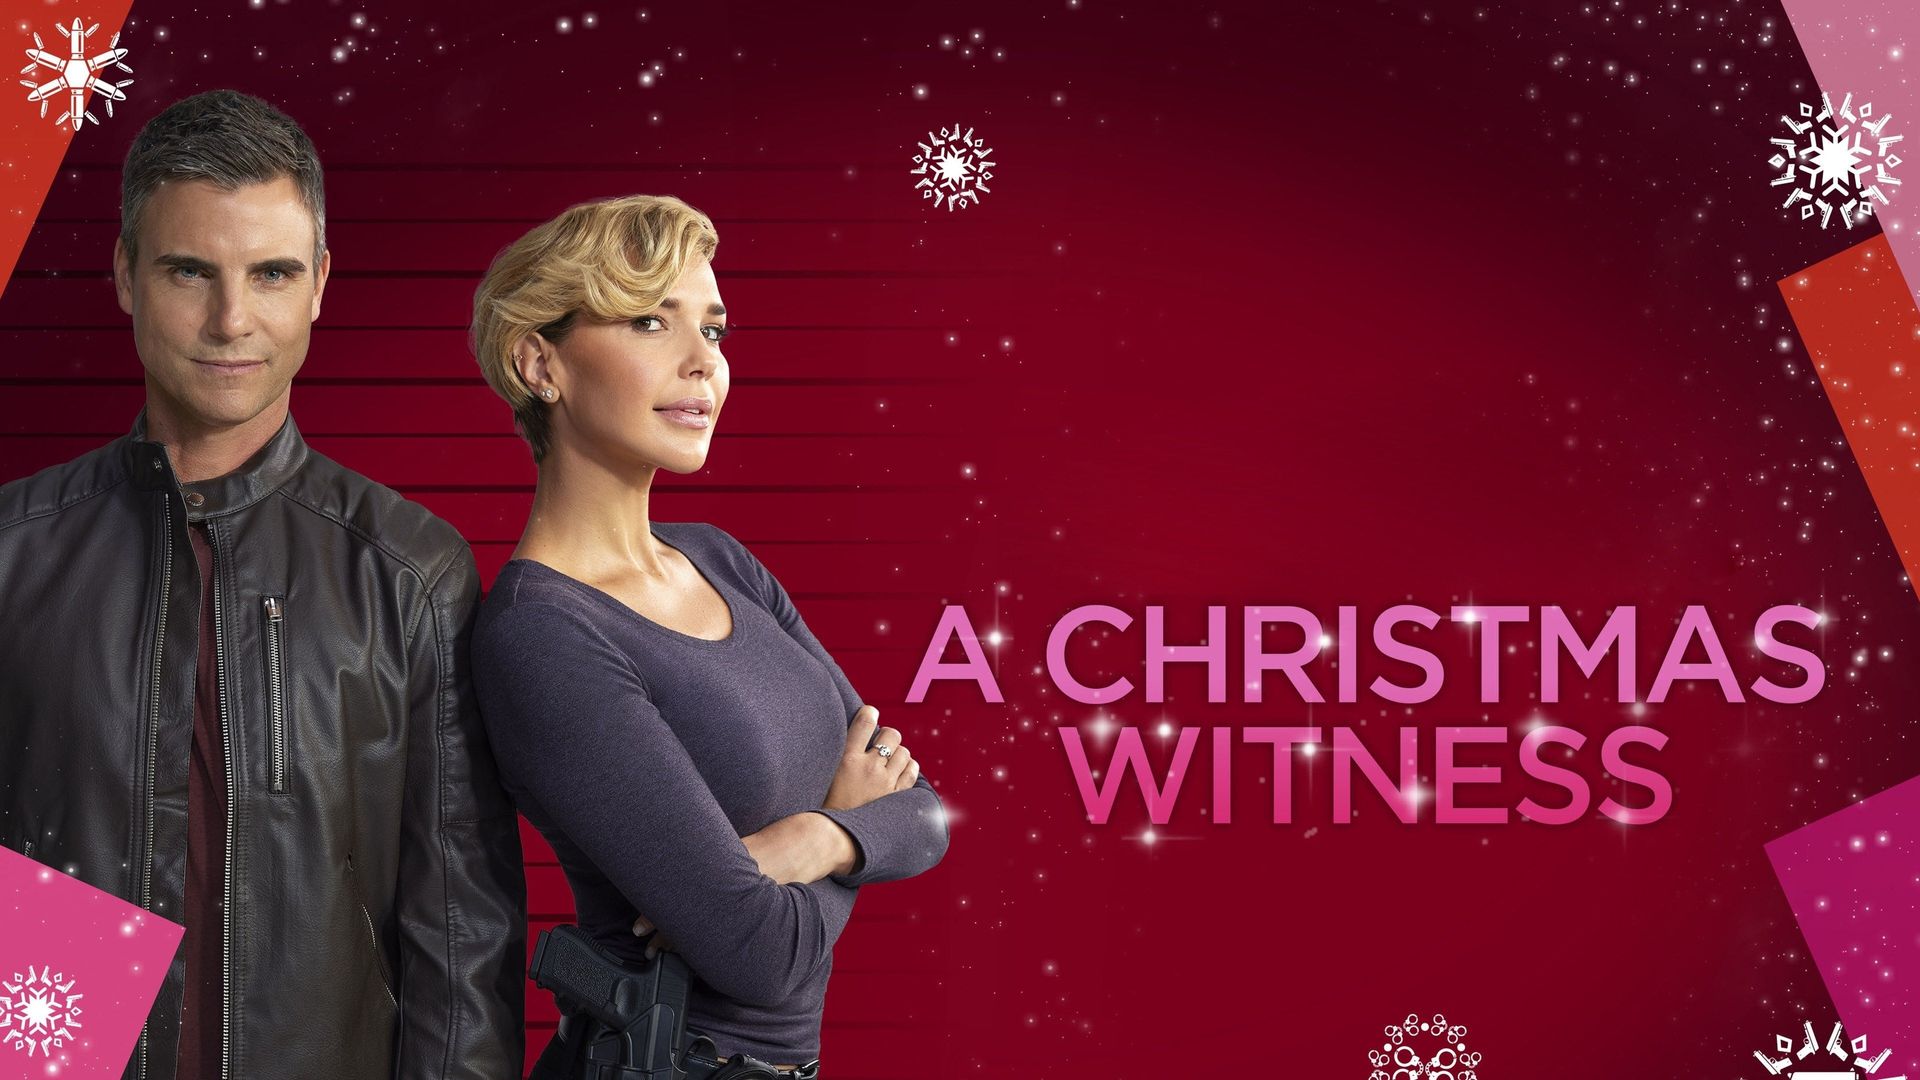 A Christmas Witness background